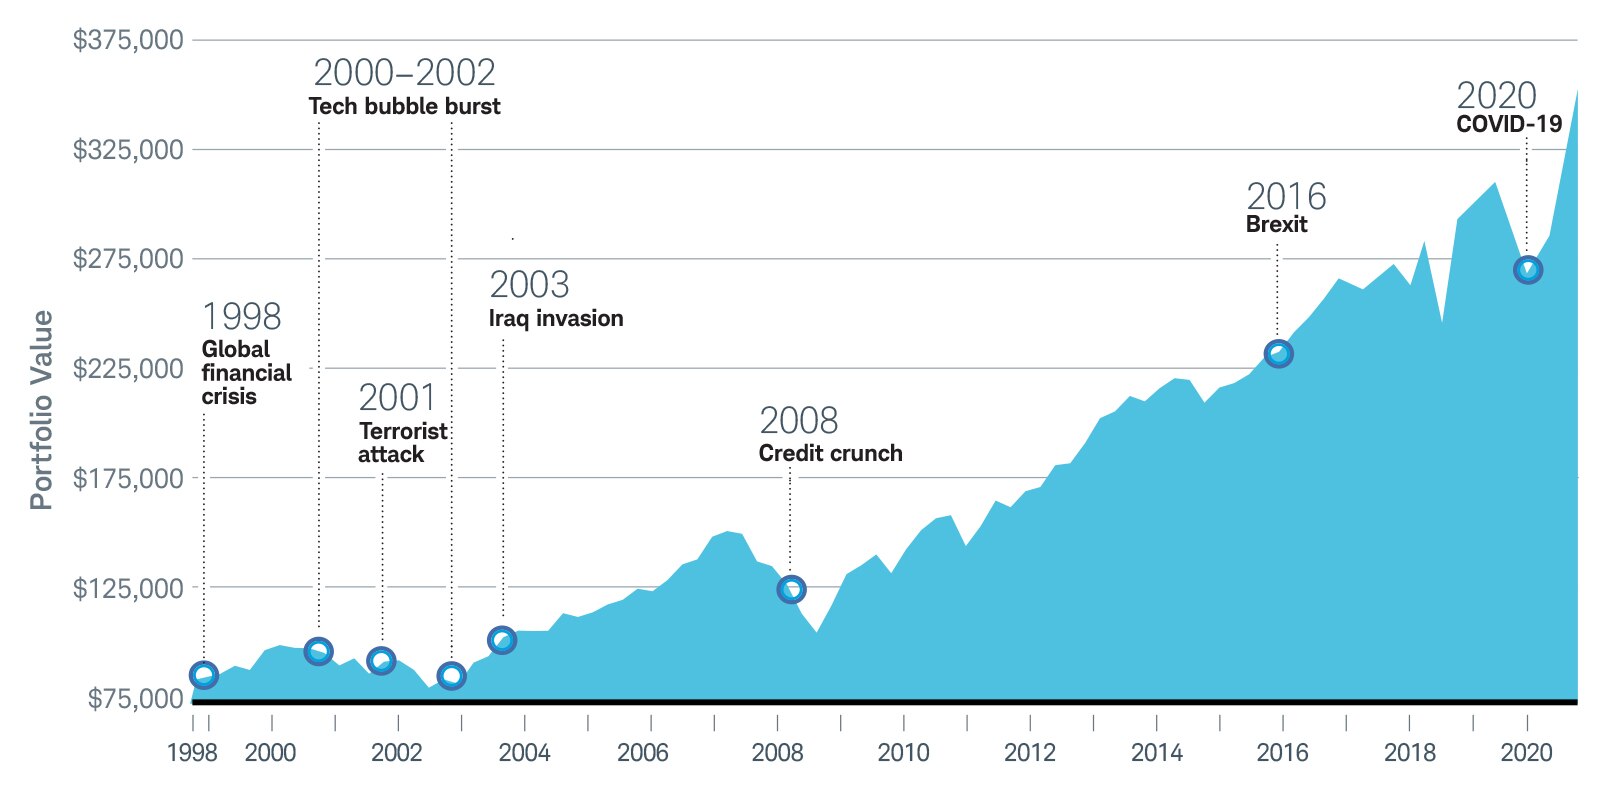 Growth chart showing that long-term investors who stay invested are rewarded over time. 